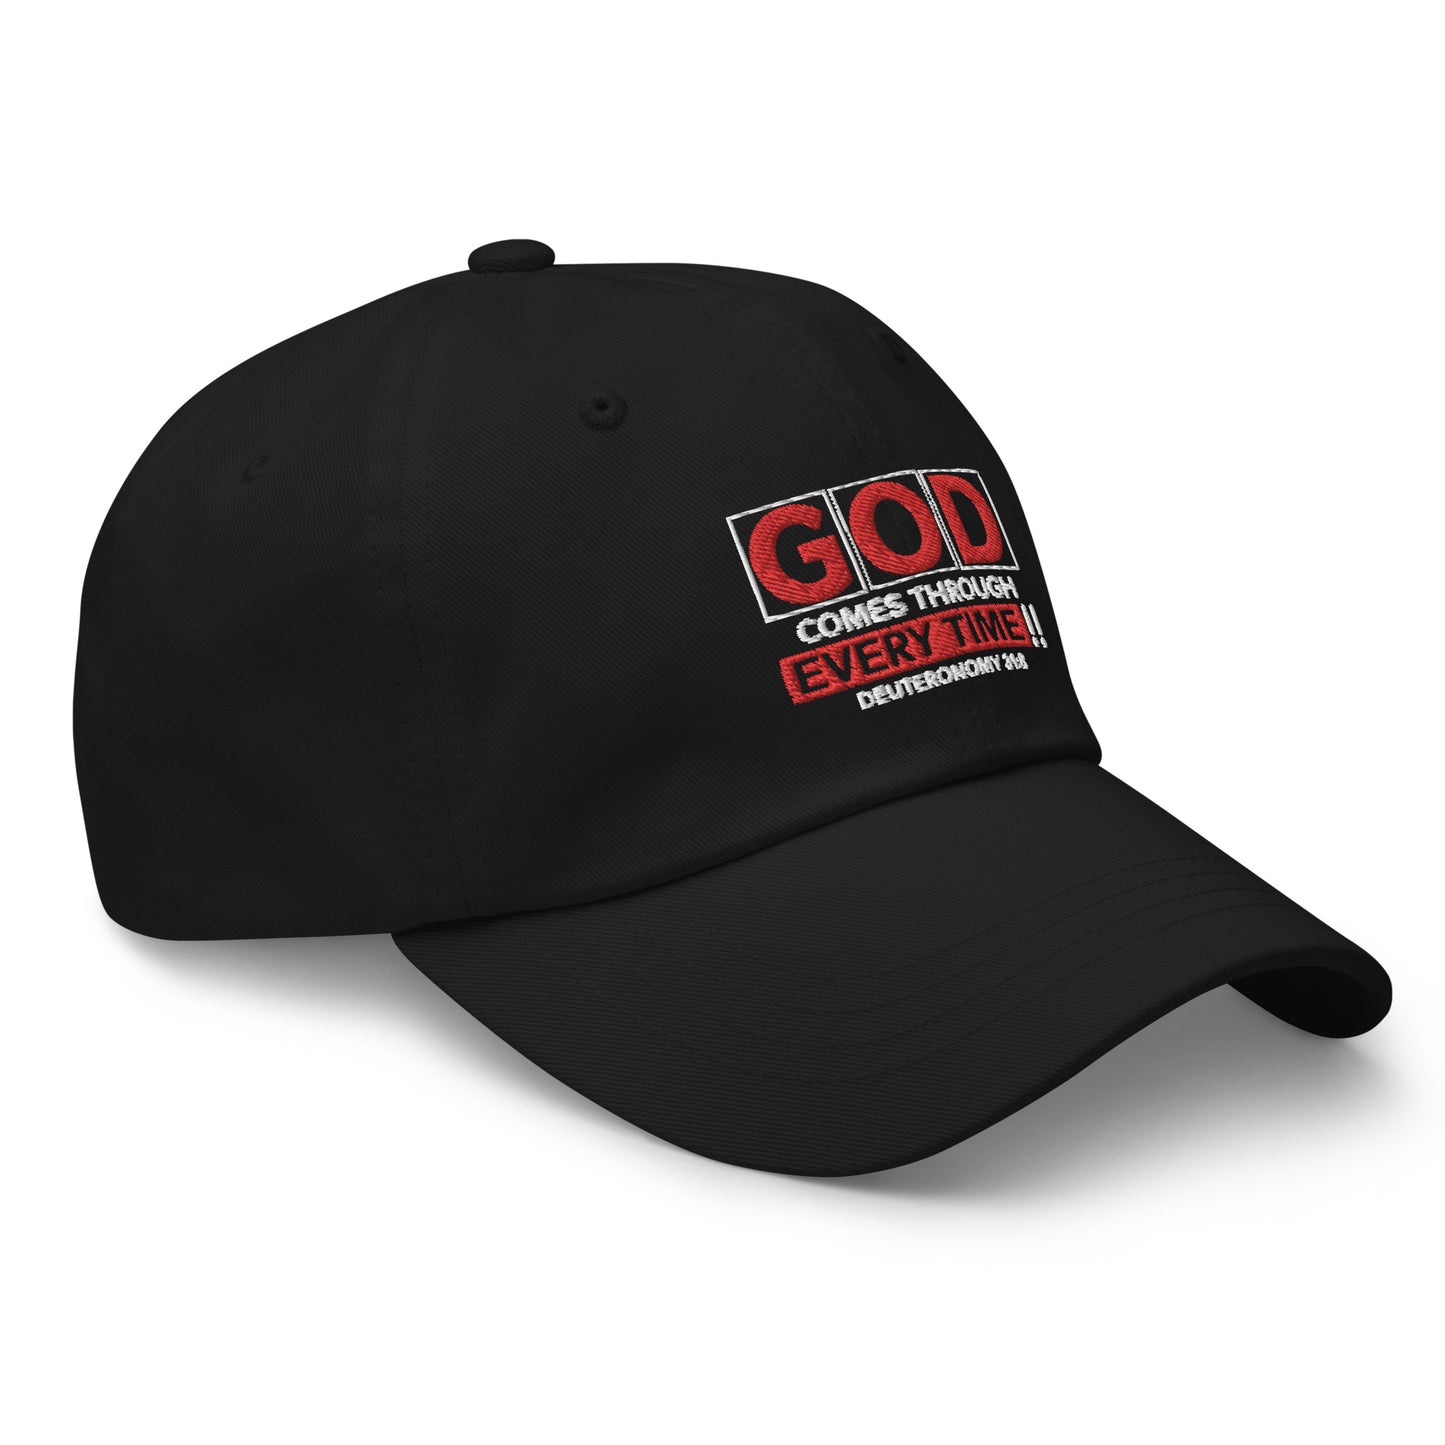 God Comes Through Every Time Hat